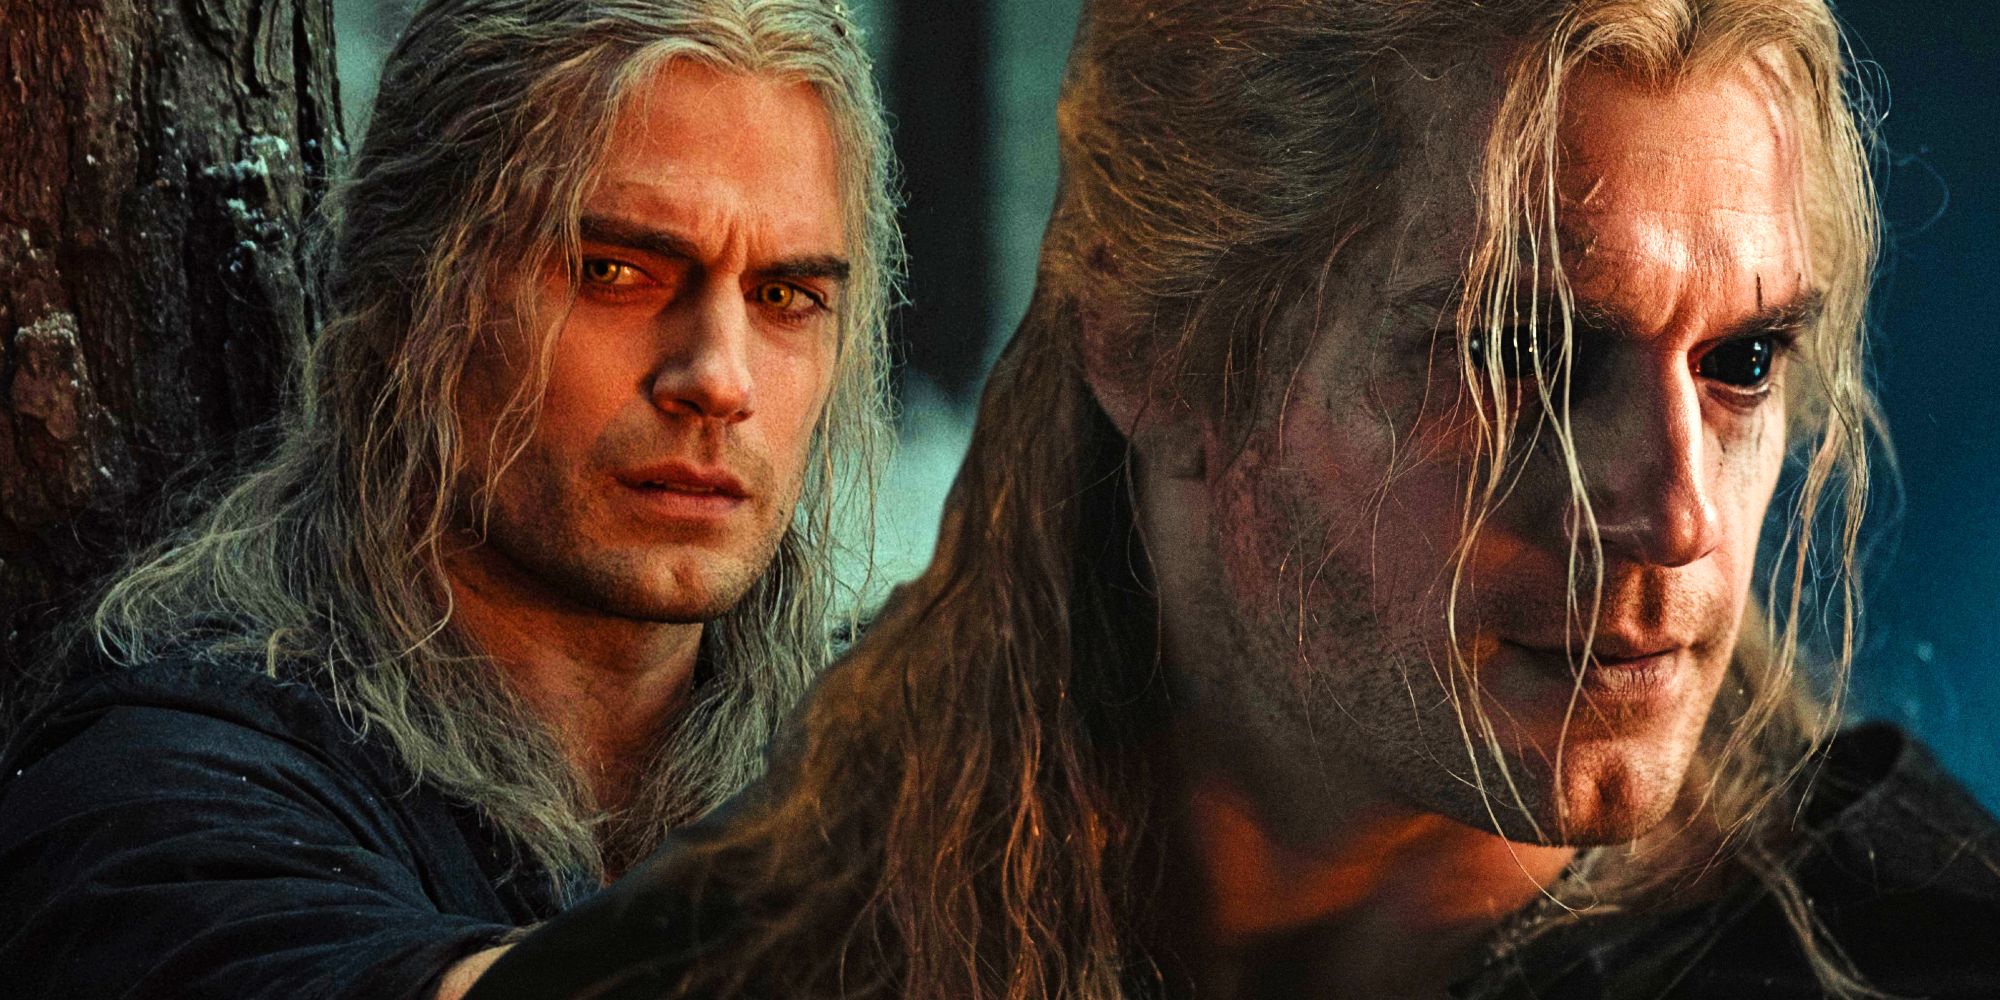 Two stills of Henry Cavill as Geral in The Witcher